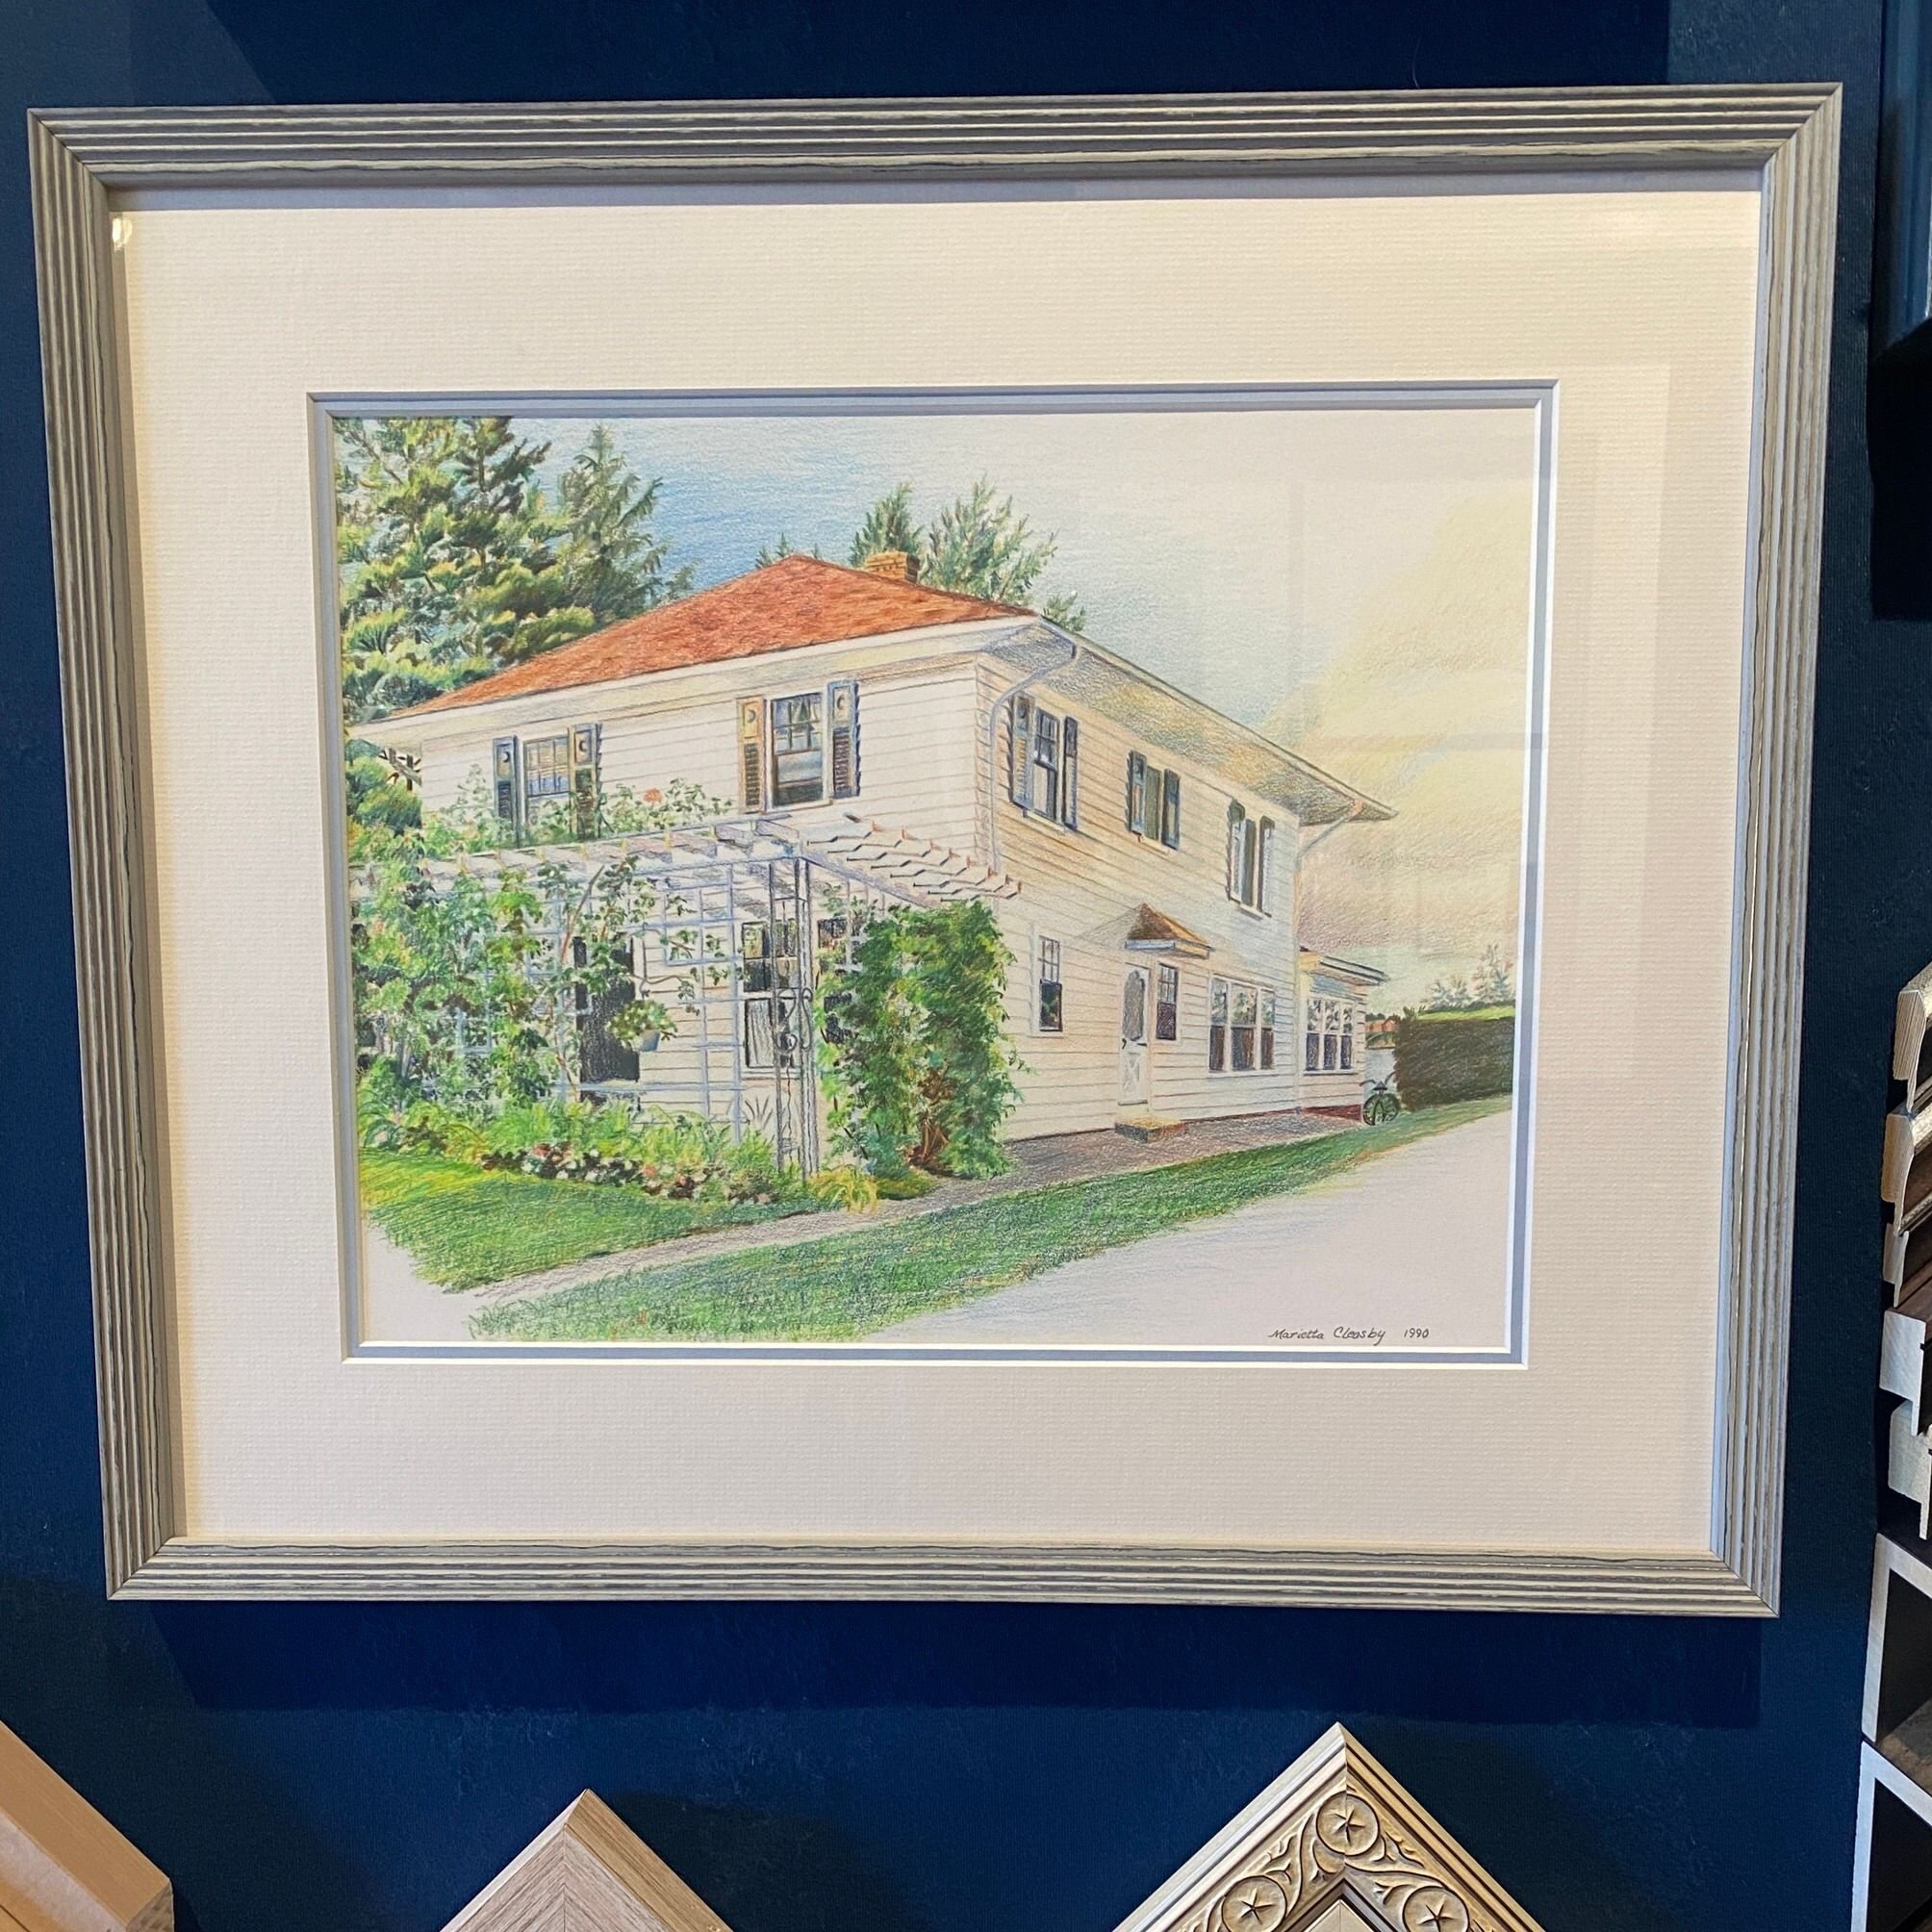 A grandparents home, filled with memories, is preserved in this lovely painting.  Double matting of ecru and soft blue accent the details and the frame is the perfect choice to blend with the home. 
@srichamber  #finishingtouchesri #wakefieldframer #